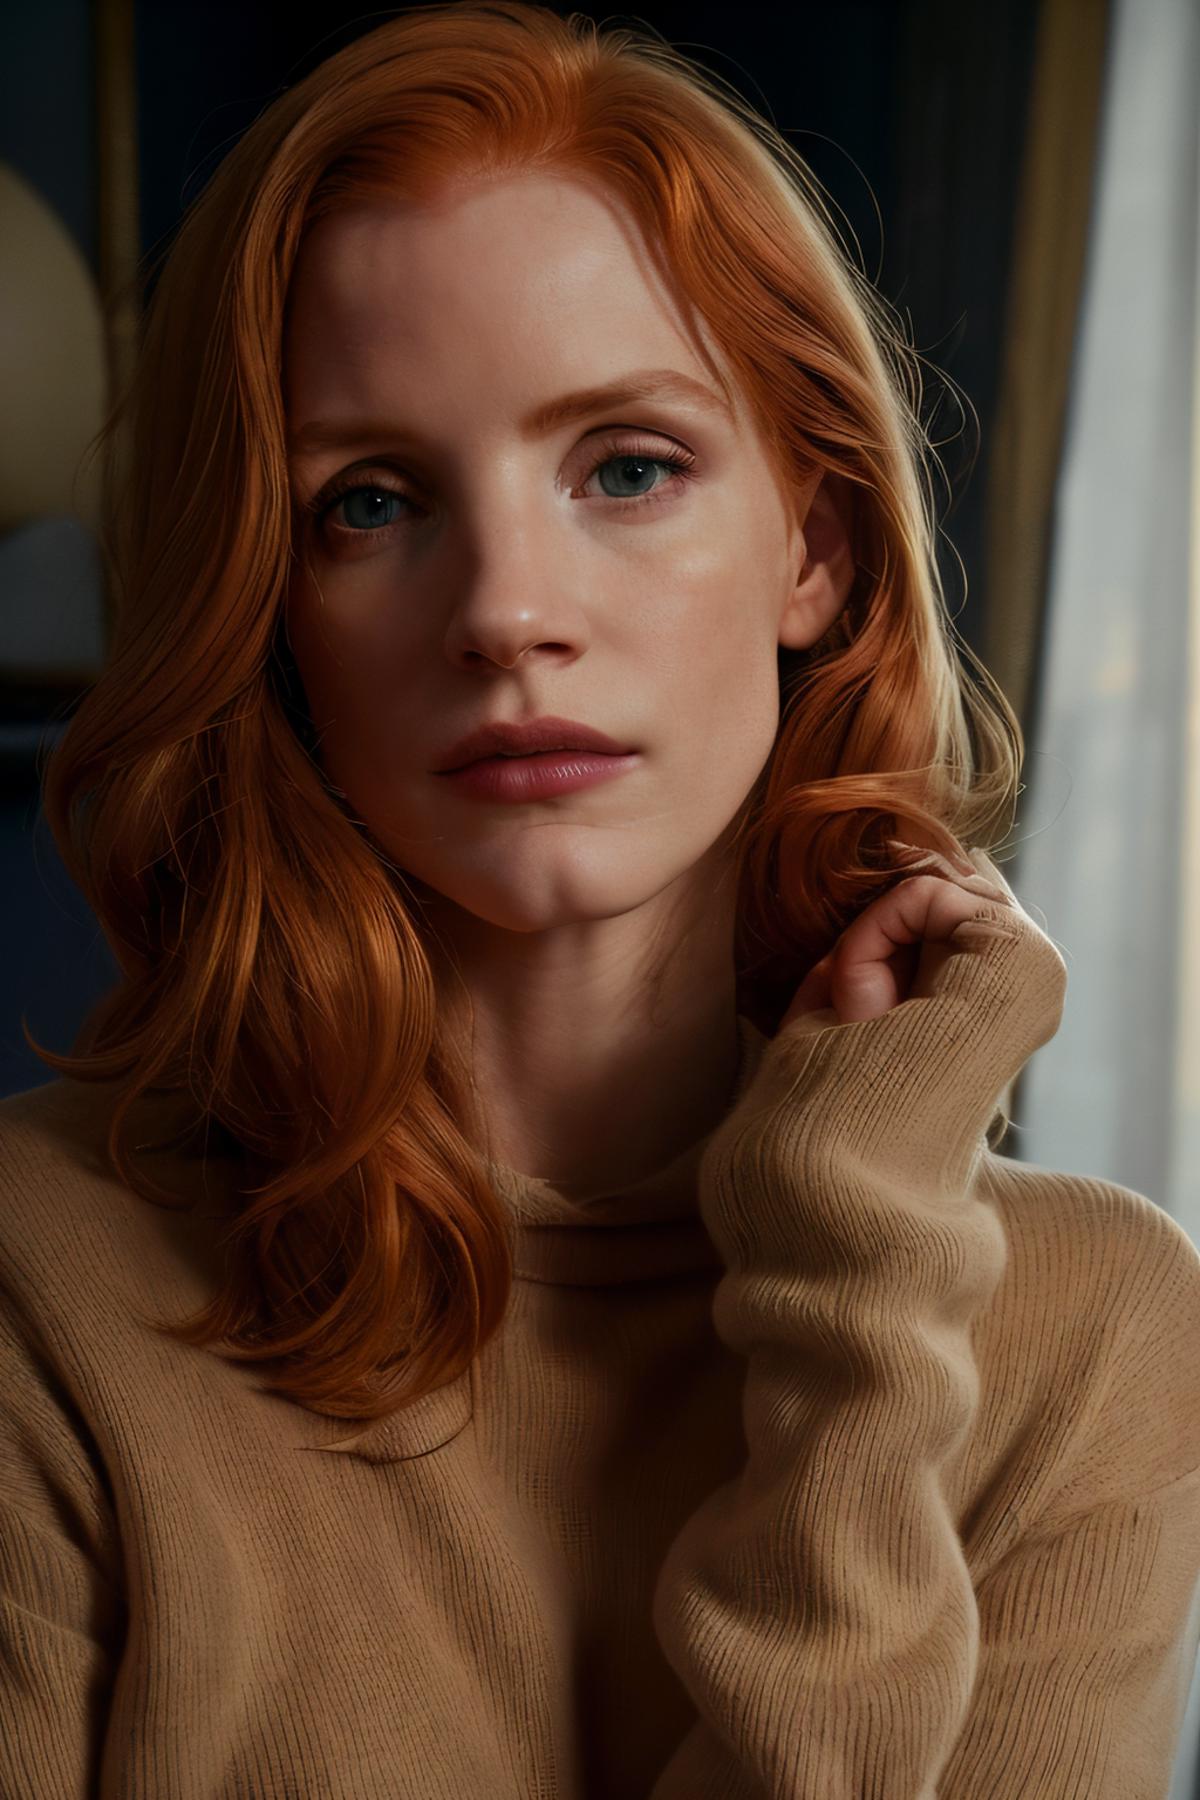 Jessica Chastain image by damocles_aaa